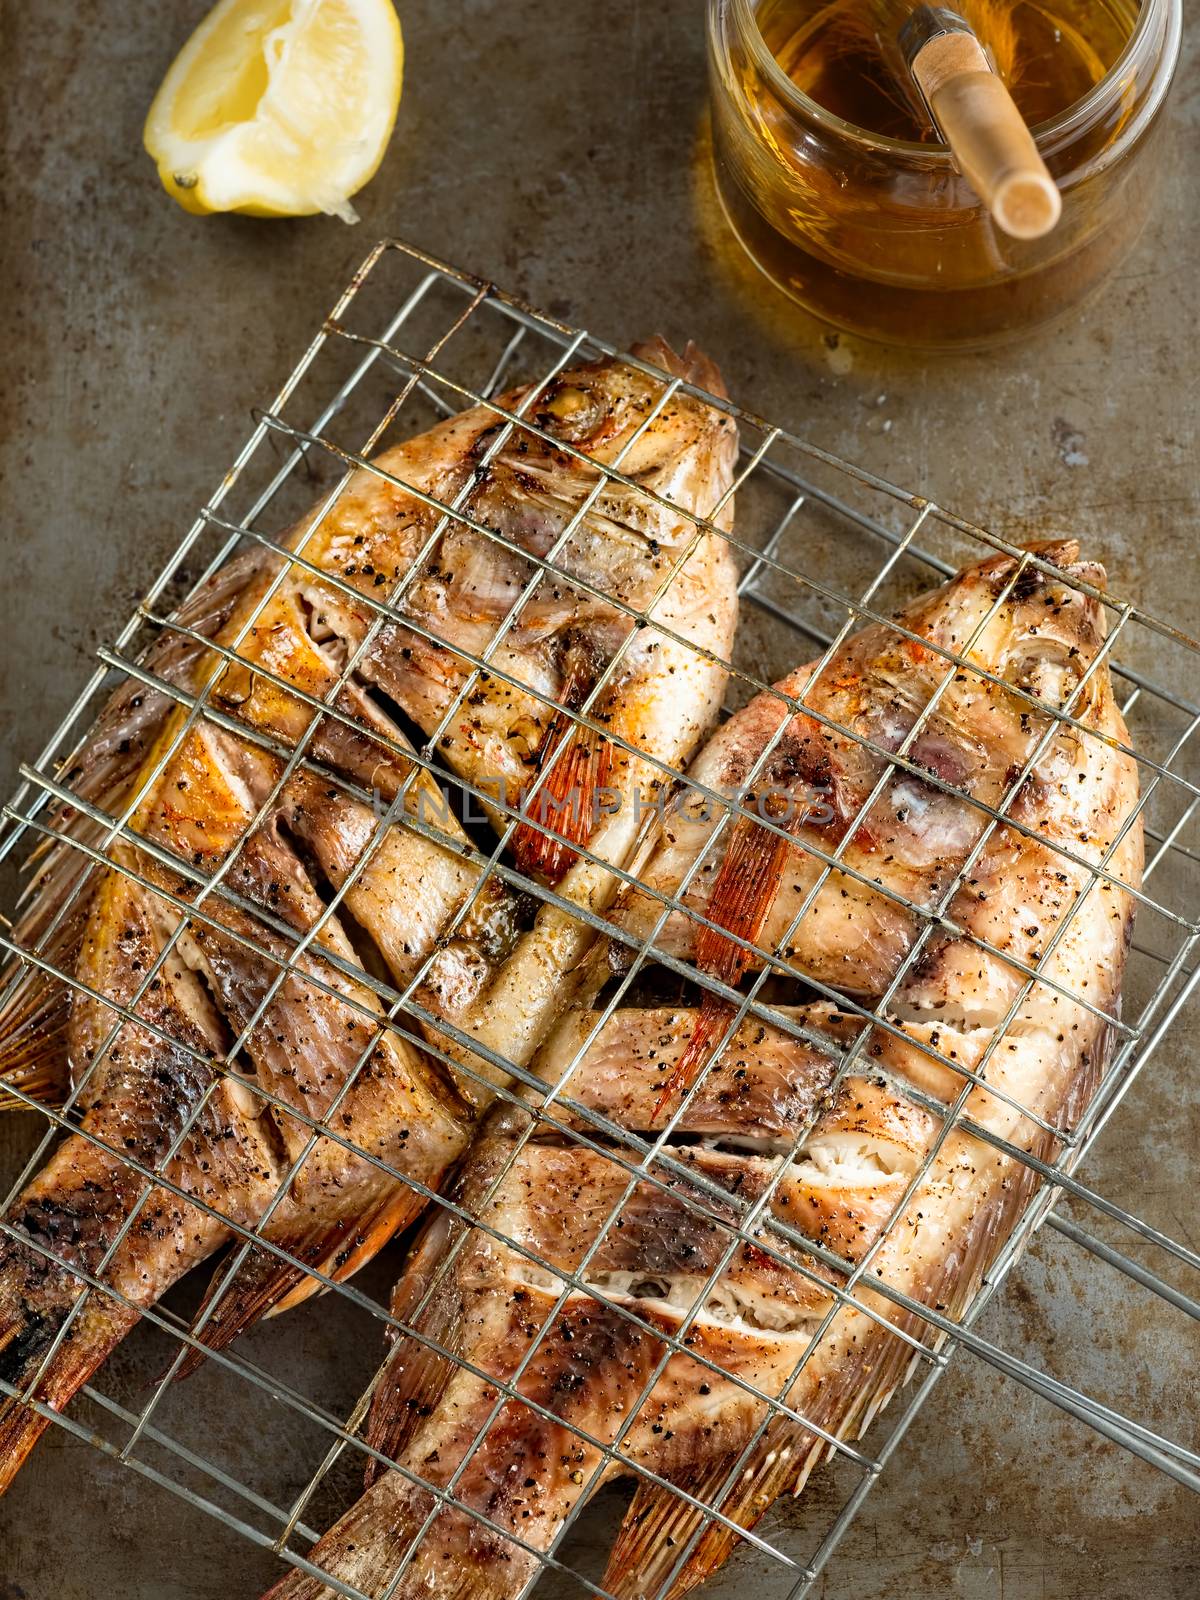 rustic barbecued grilled fish by zkruger